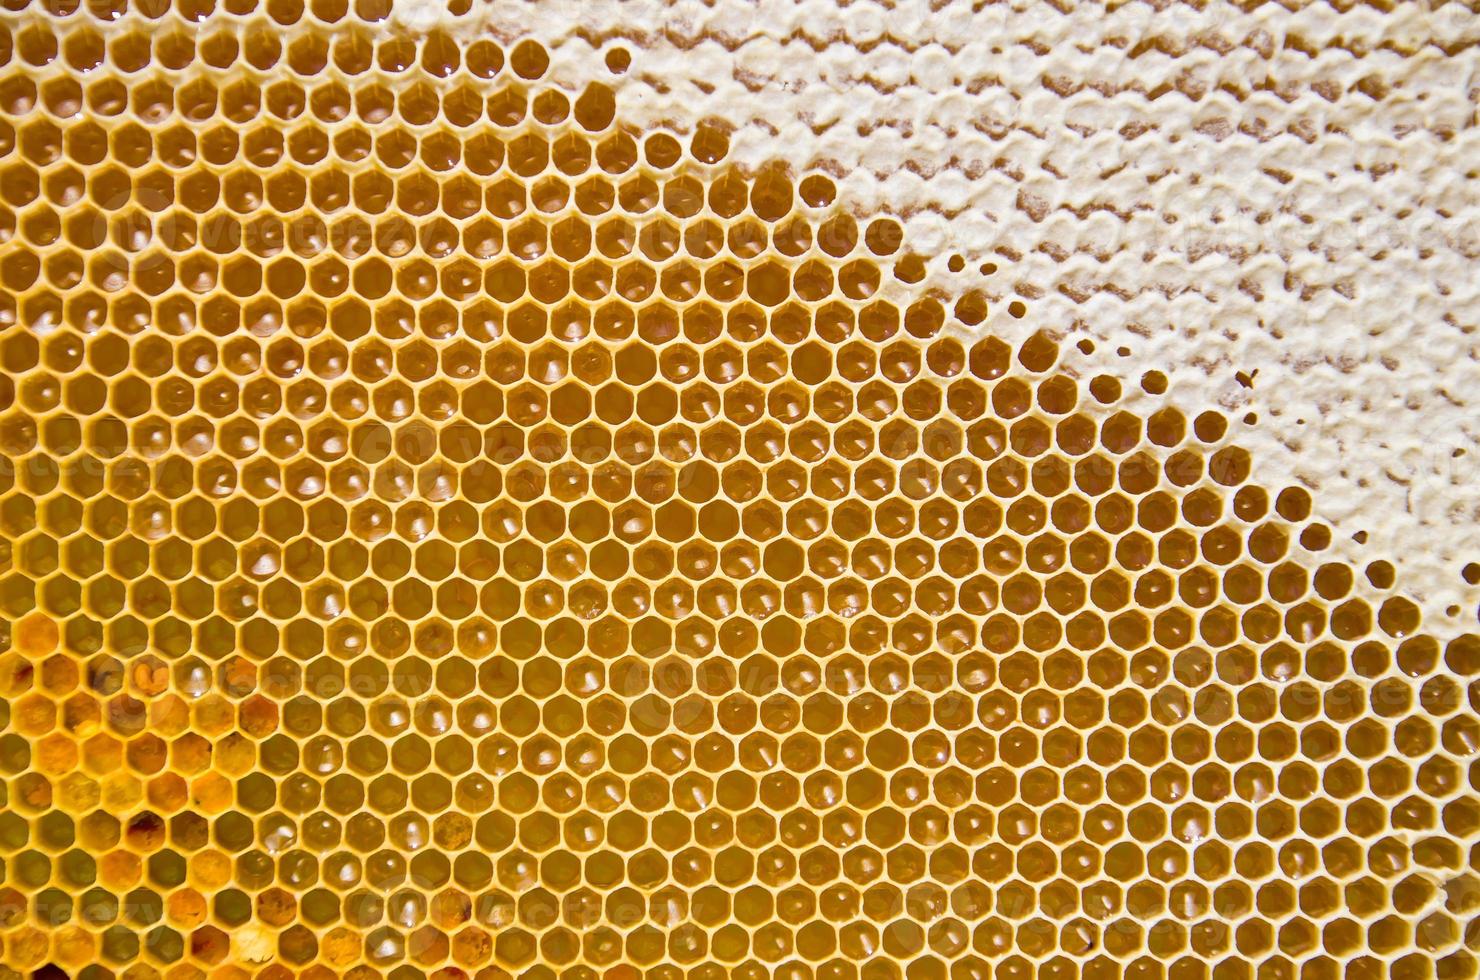 Honeycomb with fresh honey and pollen photo